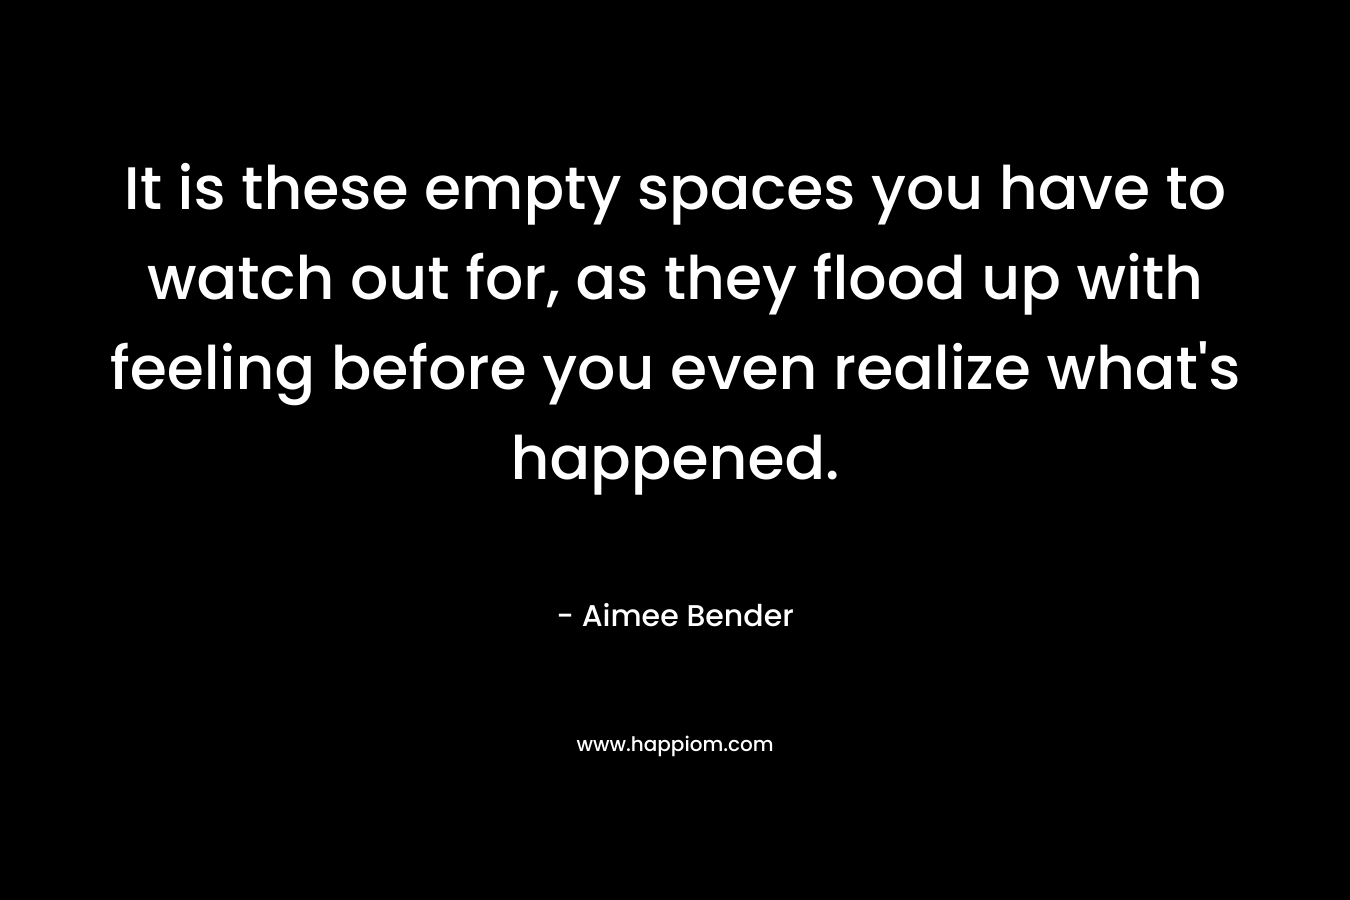 It is these empty spaces you have to watch out for, as they flood up with feeling before you even realize what’s happened. – Aimee Bender